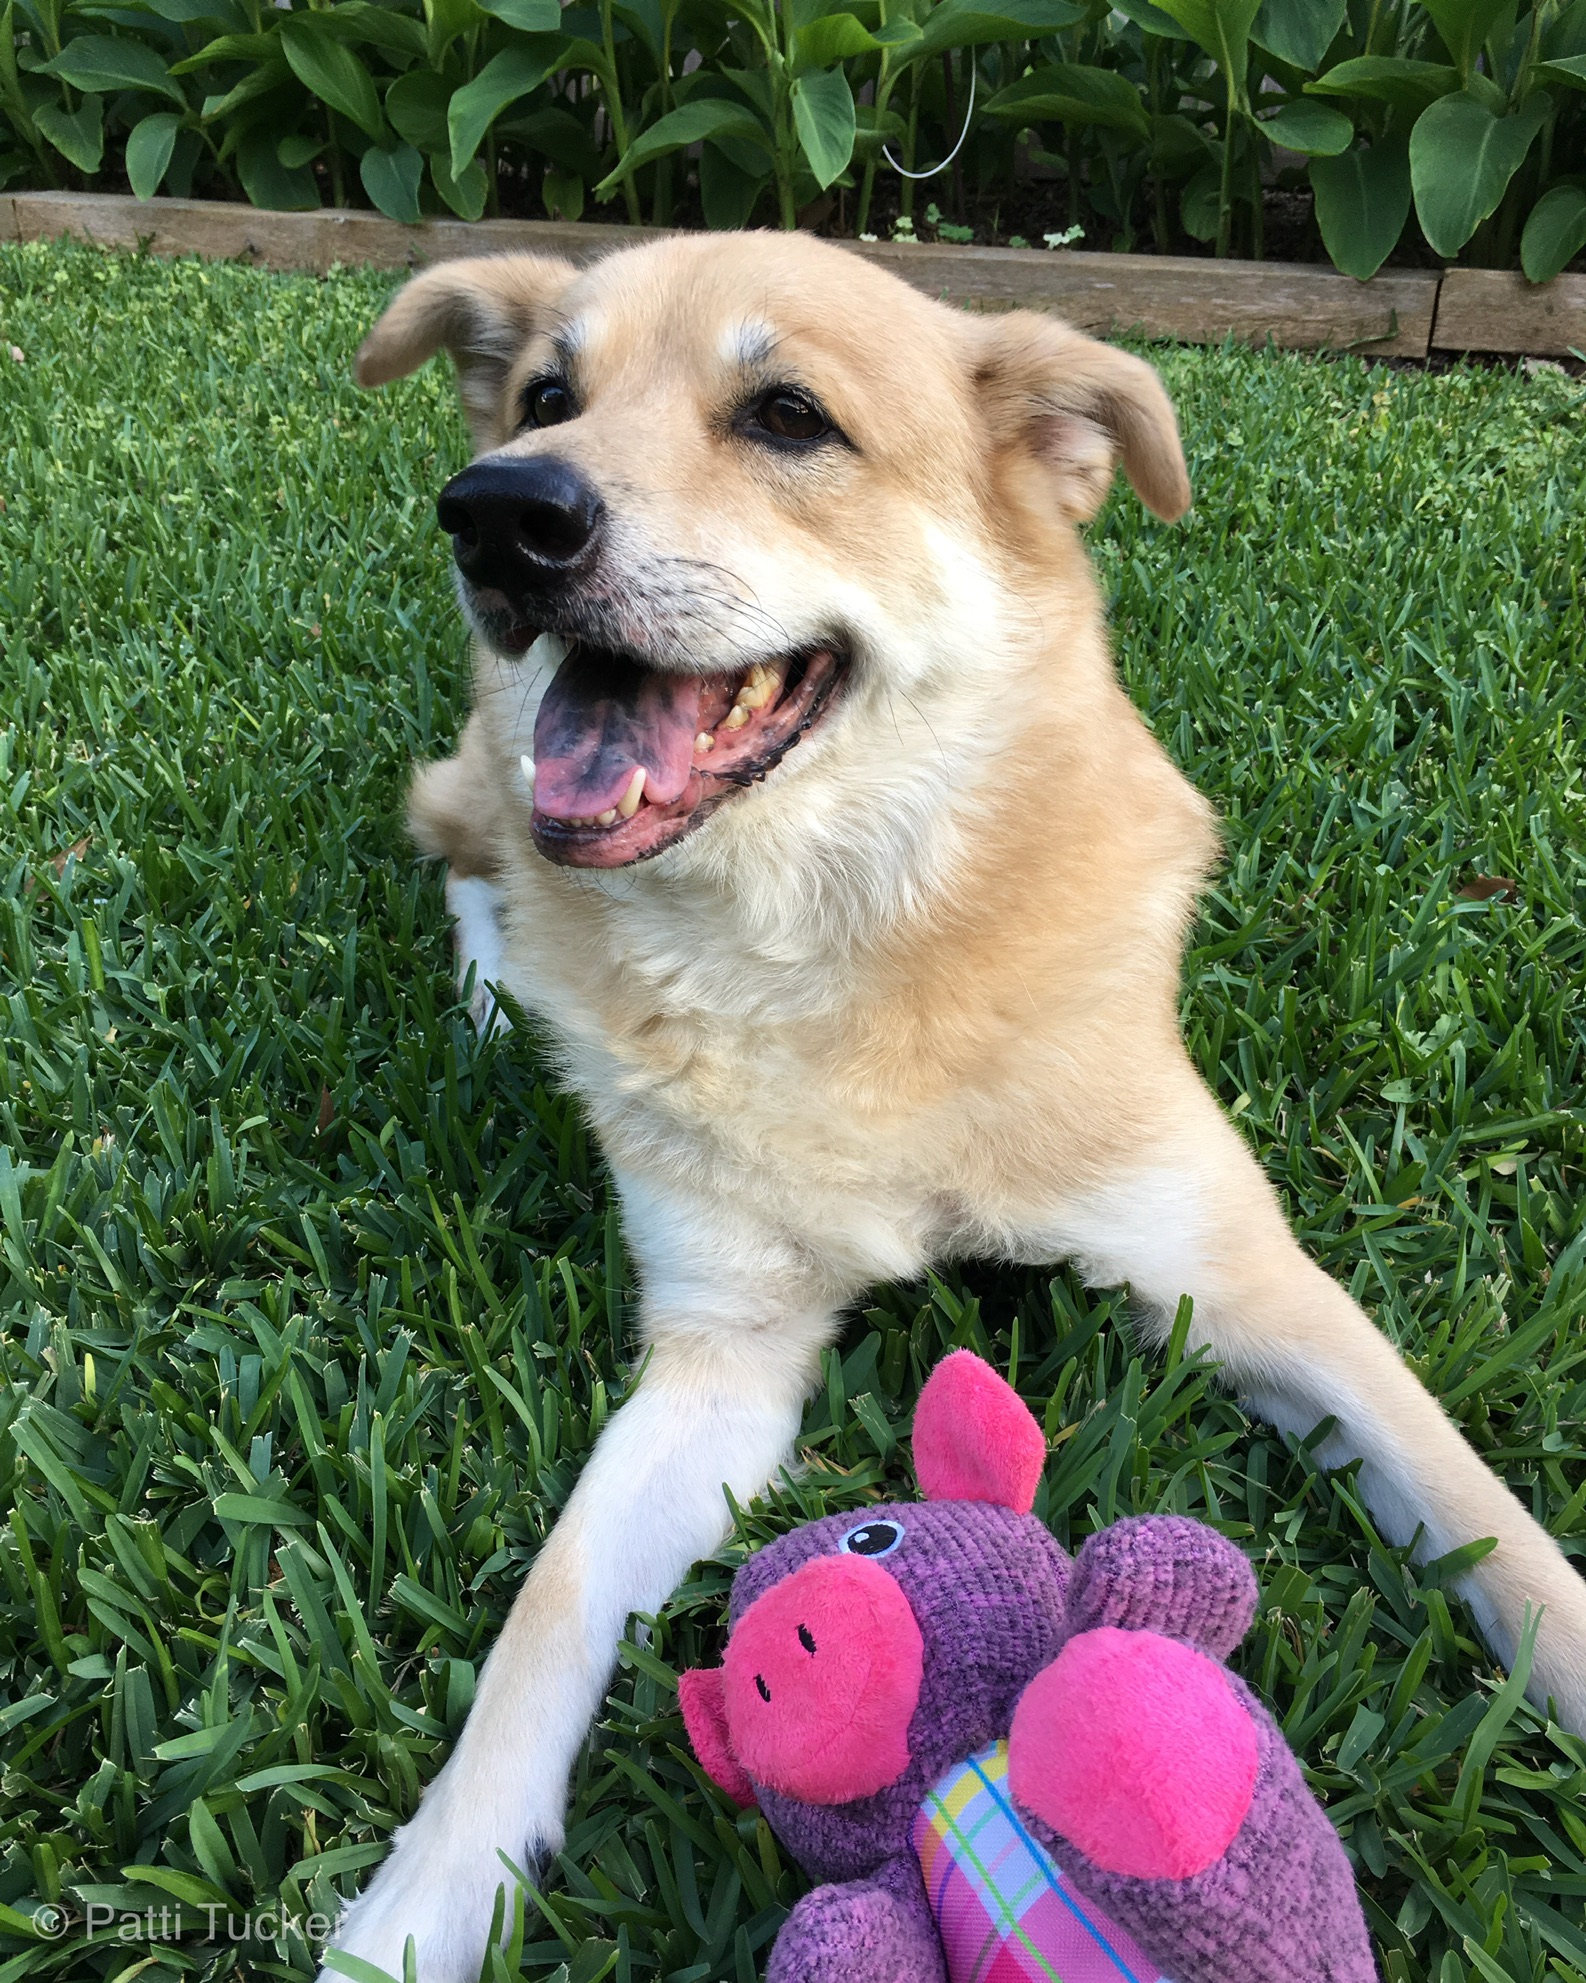 a smiling dog in the grass with a toy